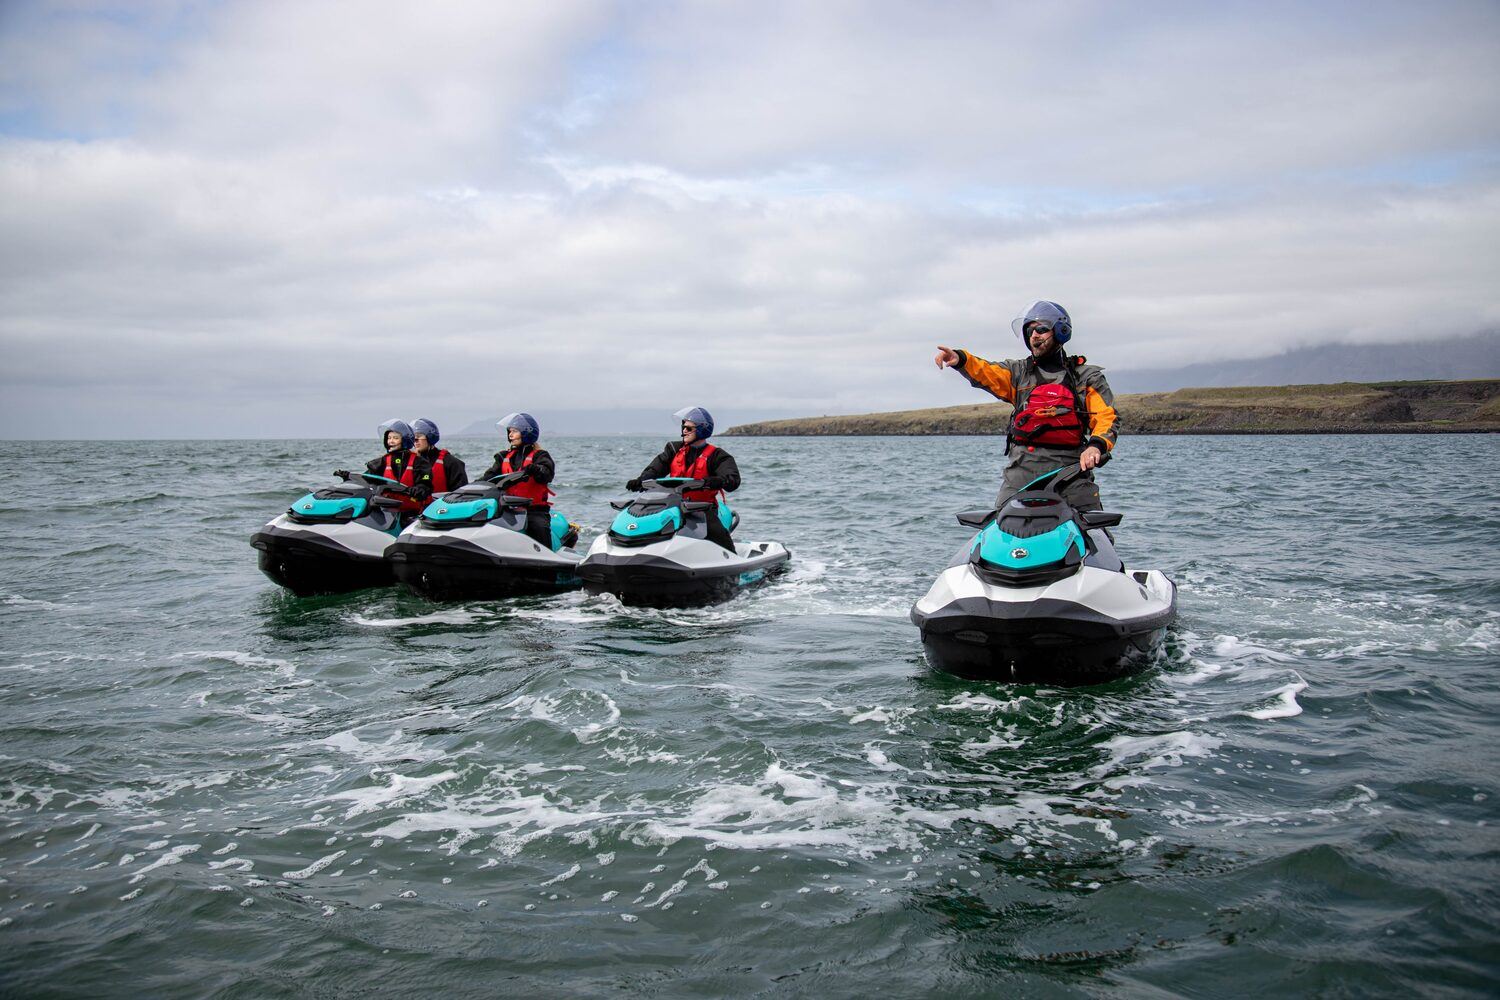 Group of tourists  in a line on jet skiing tour in Iceland in the sea with cloudy sky 